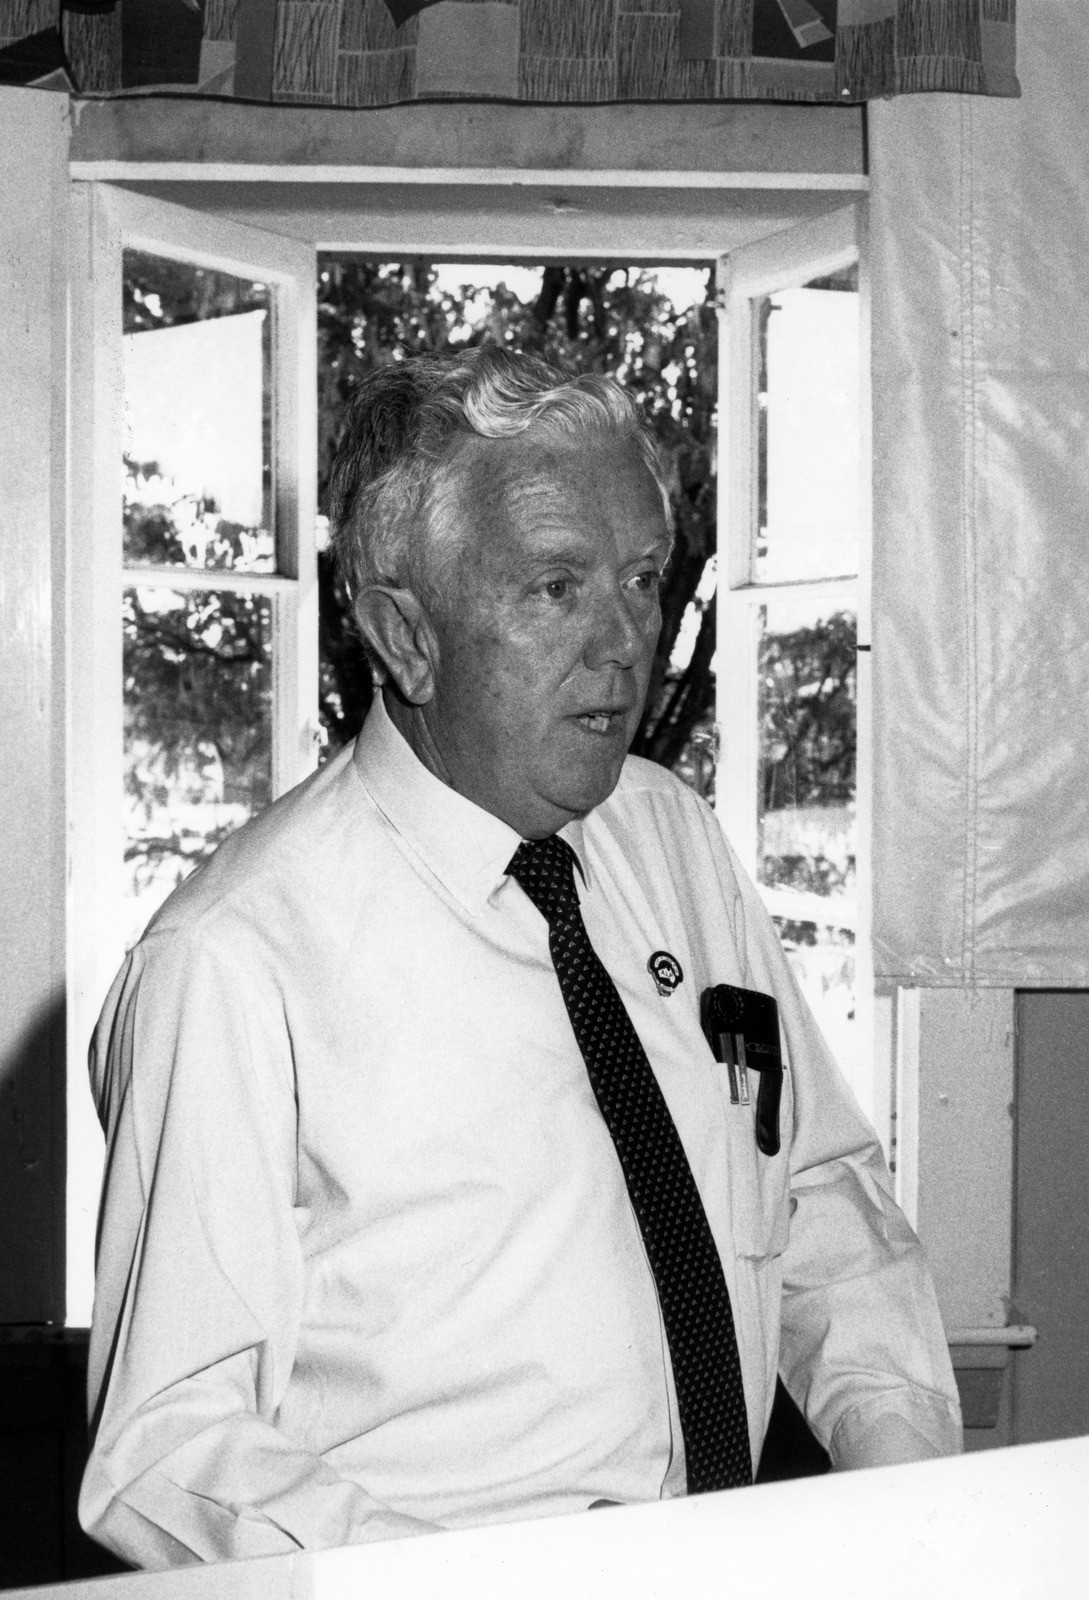 Manfred Cross standing at a podium addressing the Australian Workers Union meeting in Barcaldine, Queensland, 1991